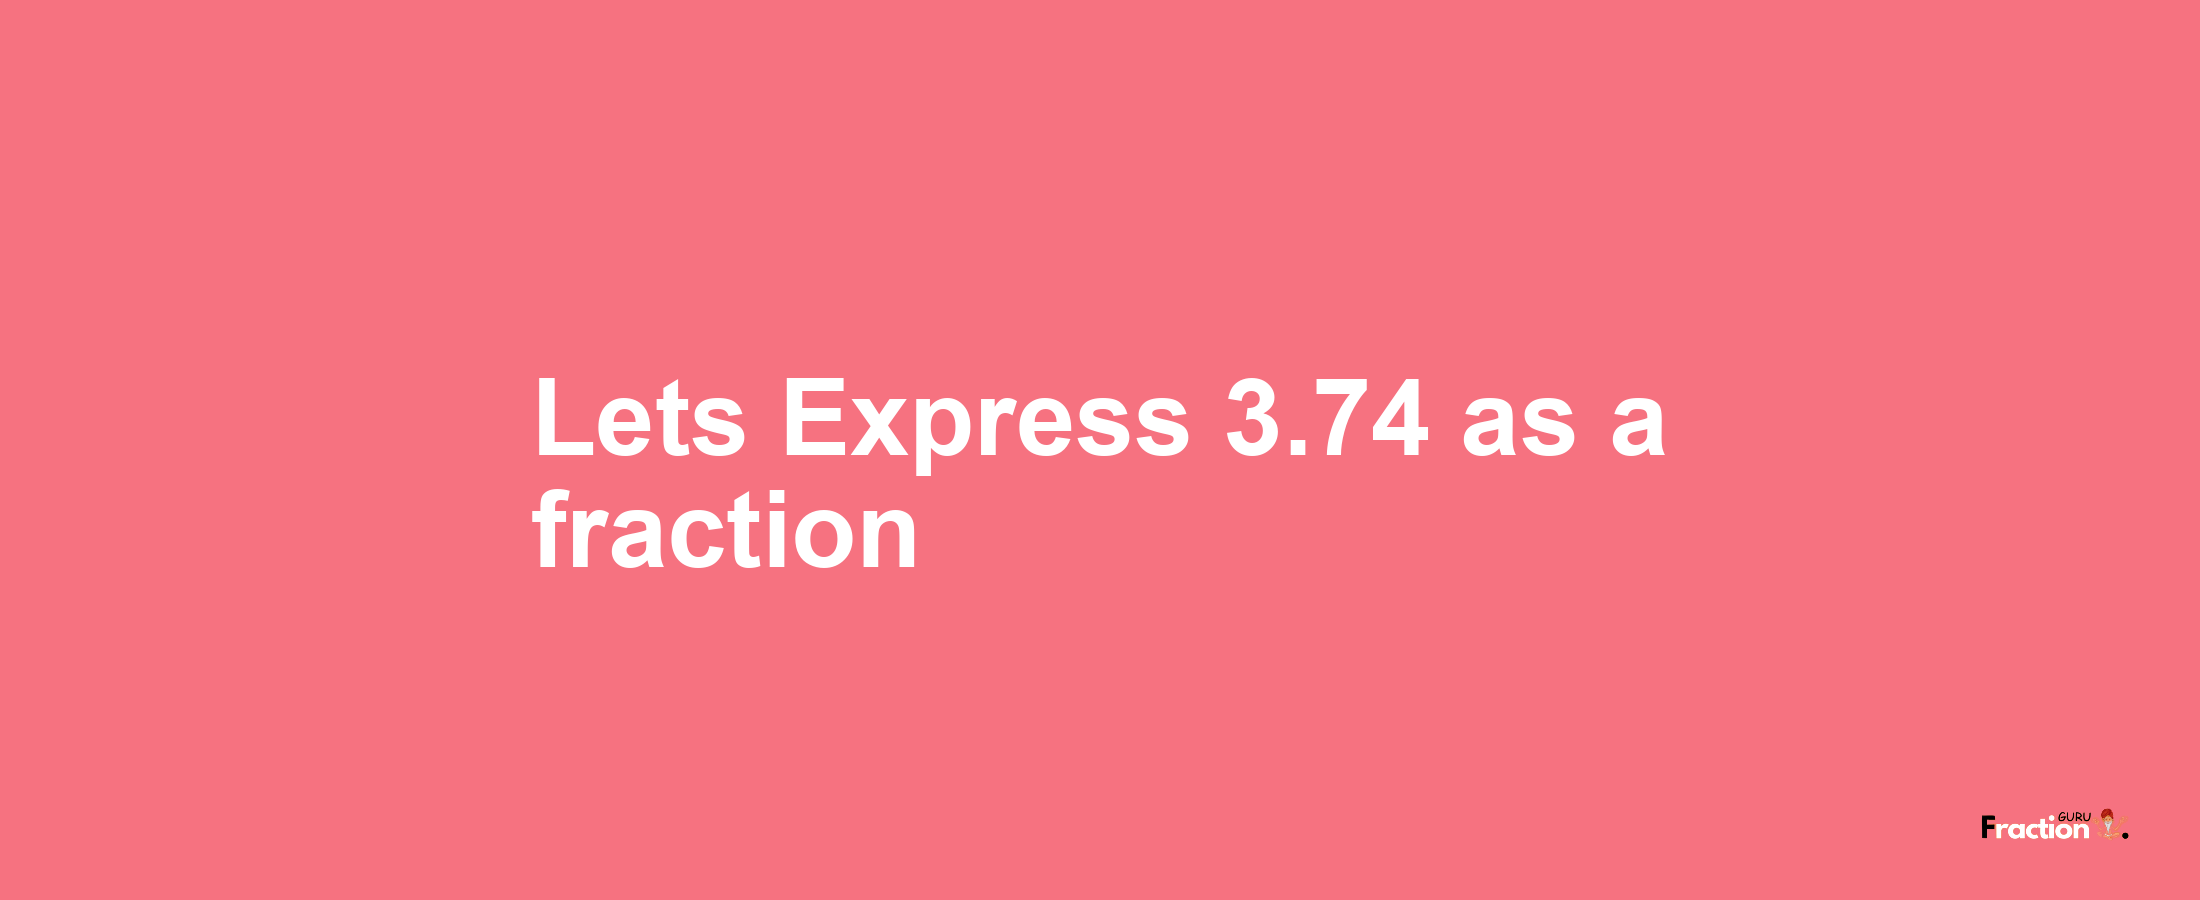 Lets Express 3.74 as afraction